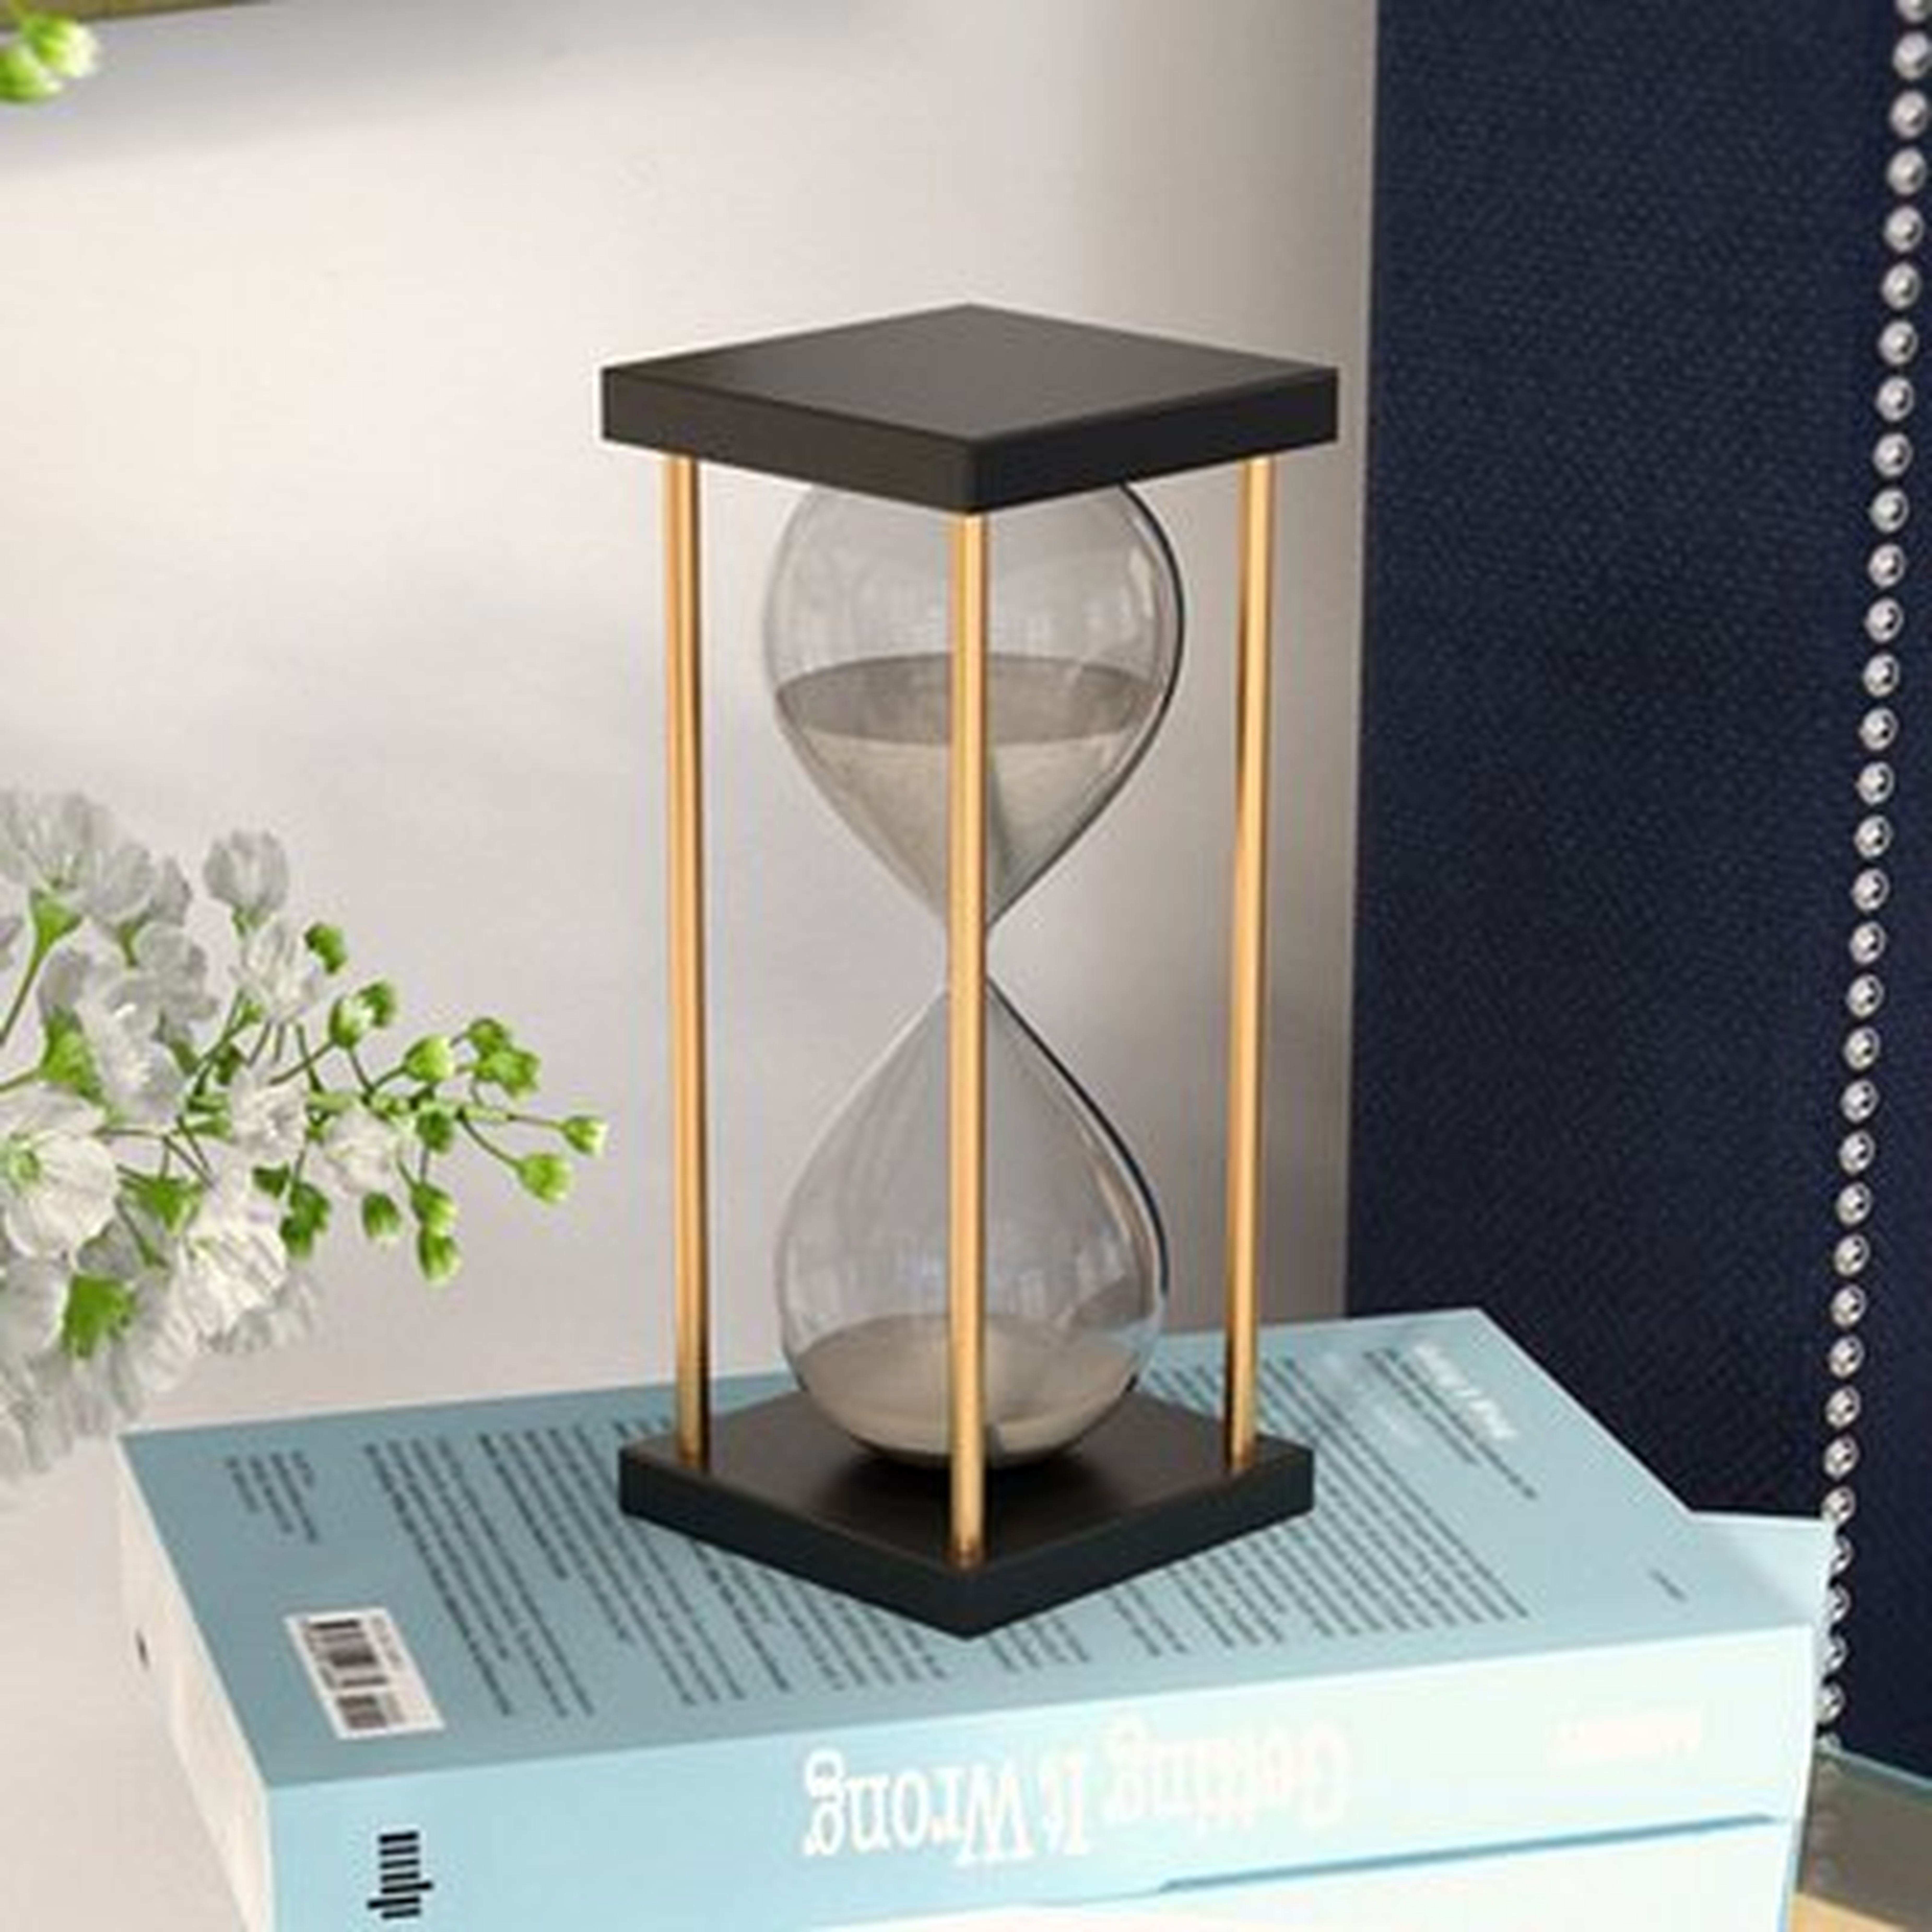 Ophelie Hand-crafted MDF Hourglass in Stand - Wayfair